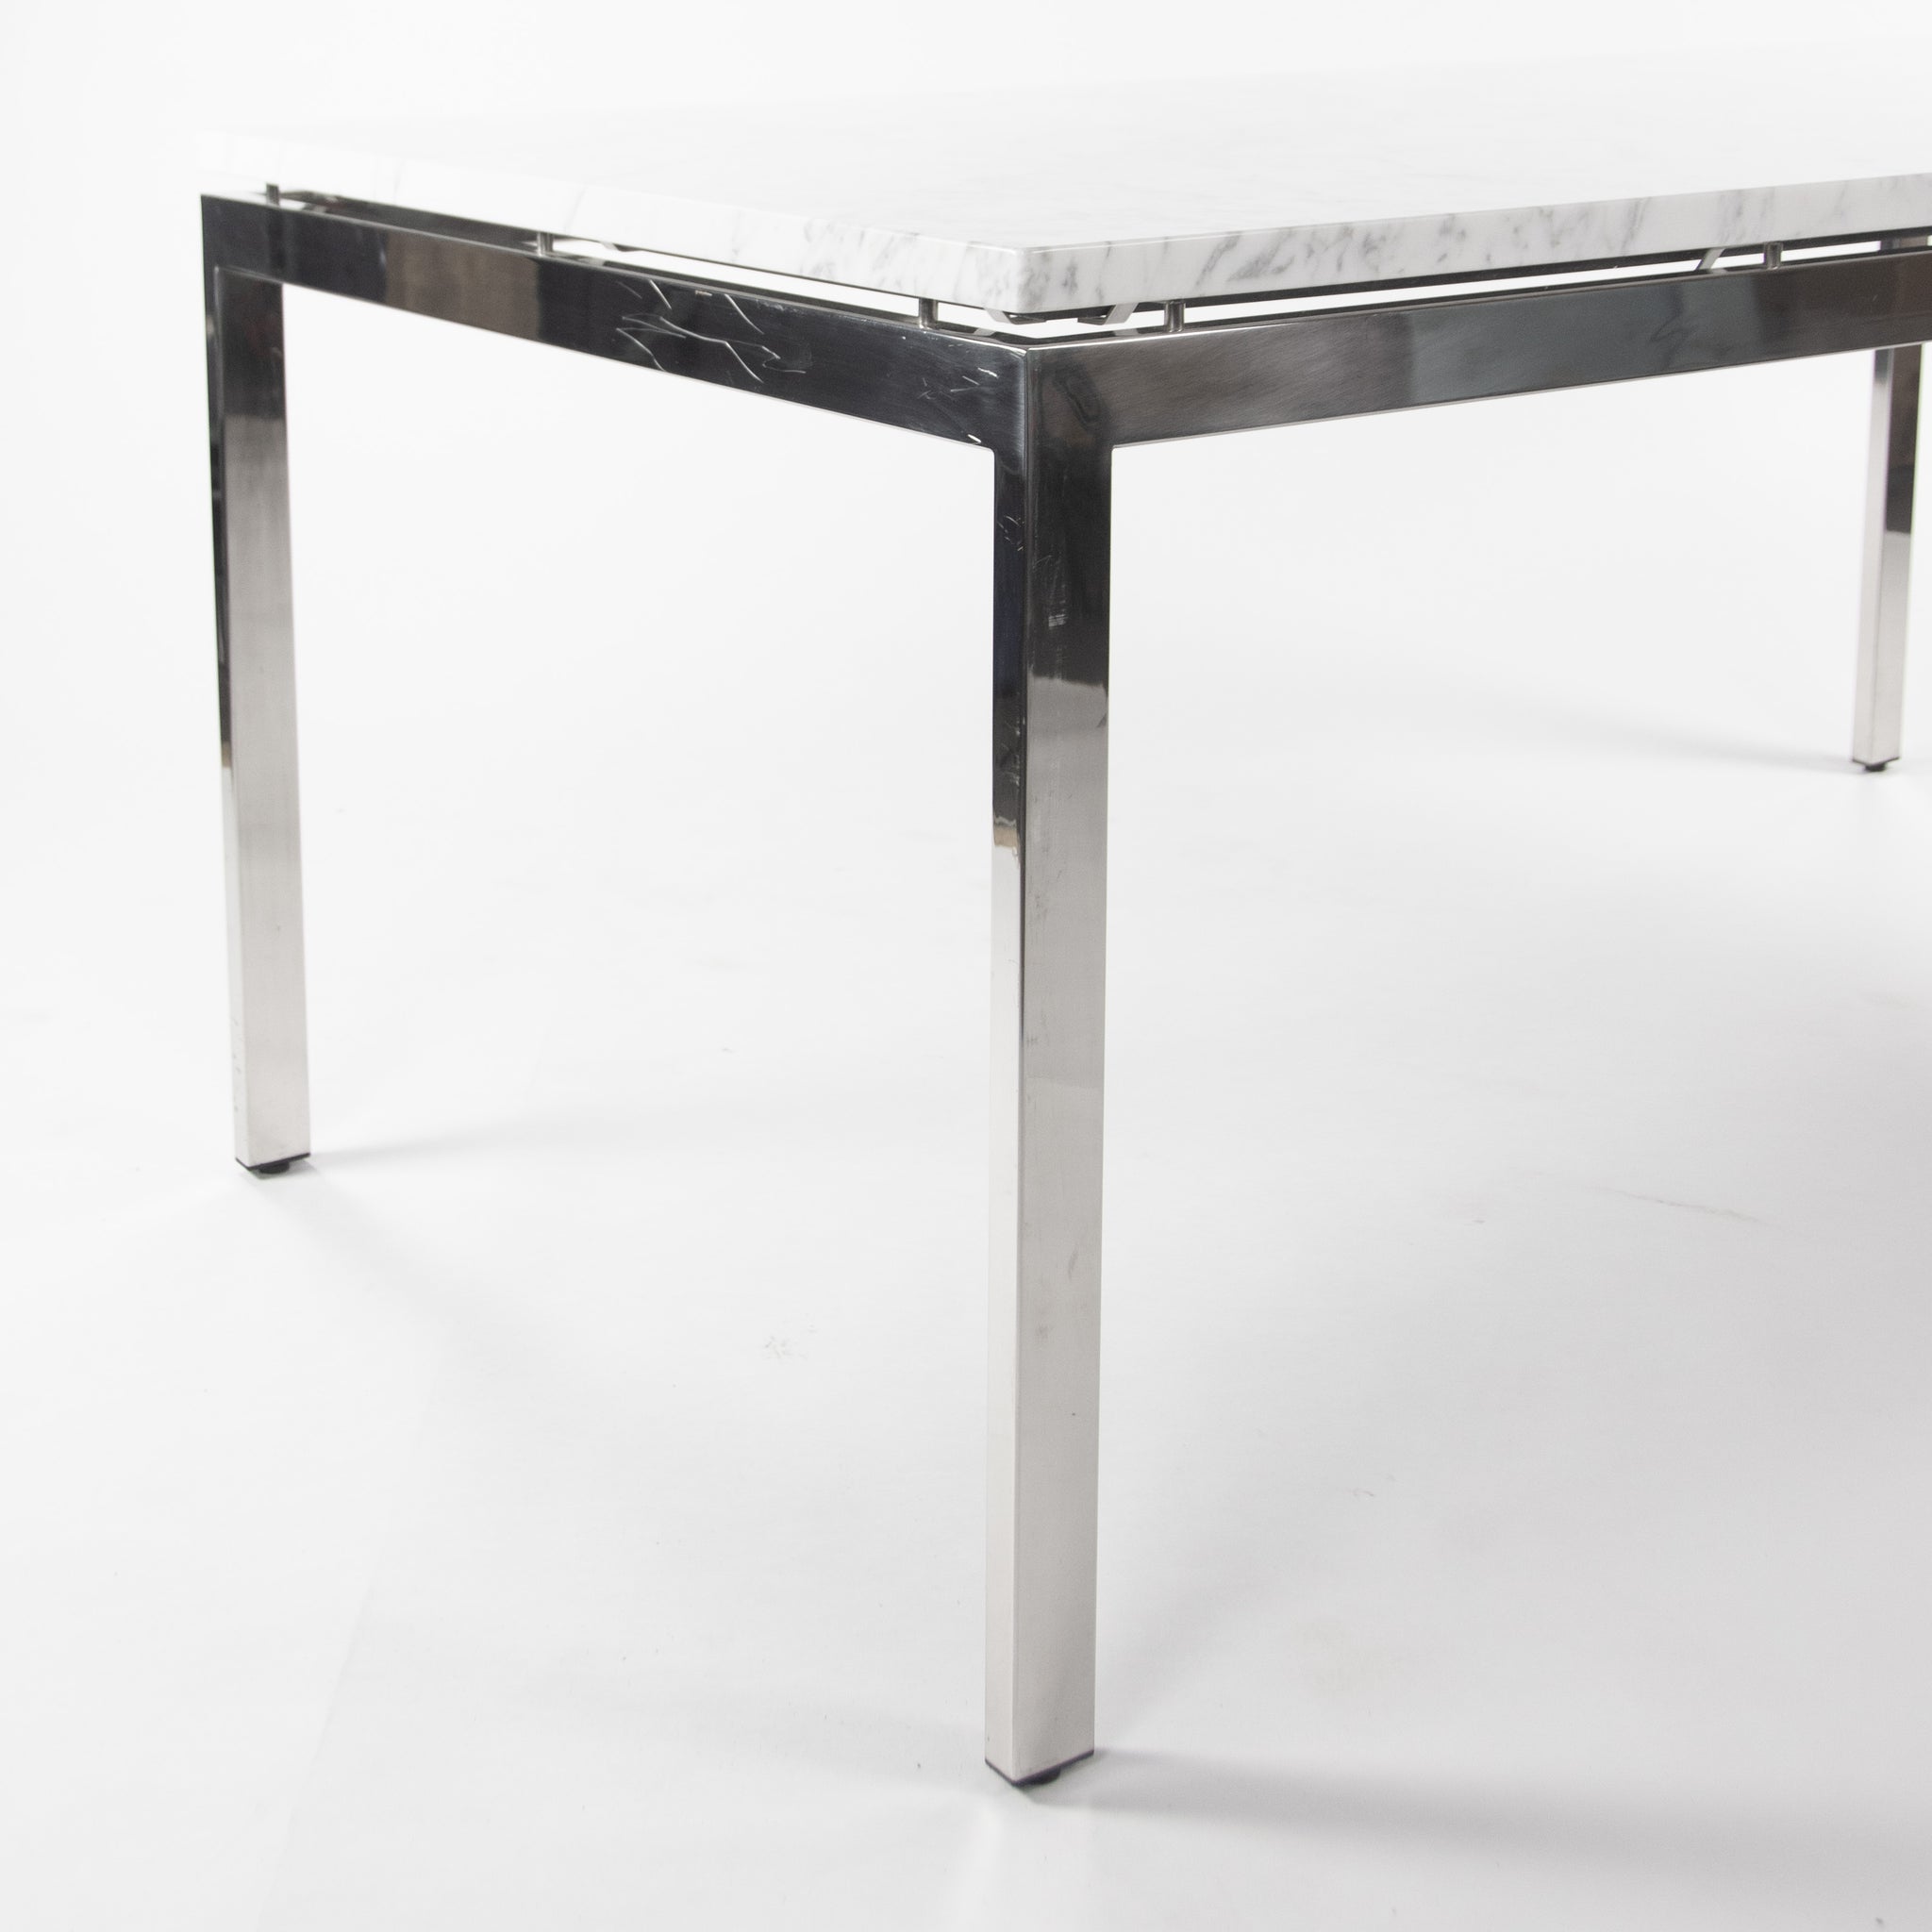 SOLD Marble 2011 Cumberland Meeting Dining Table Desk White w/ Stainless Base Knoll